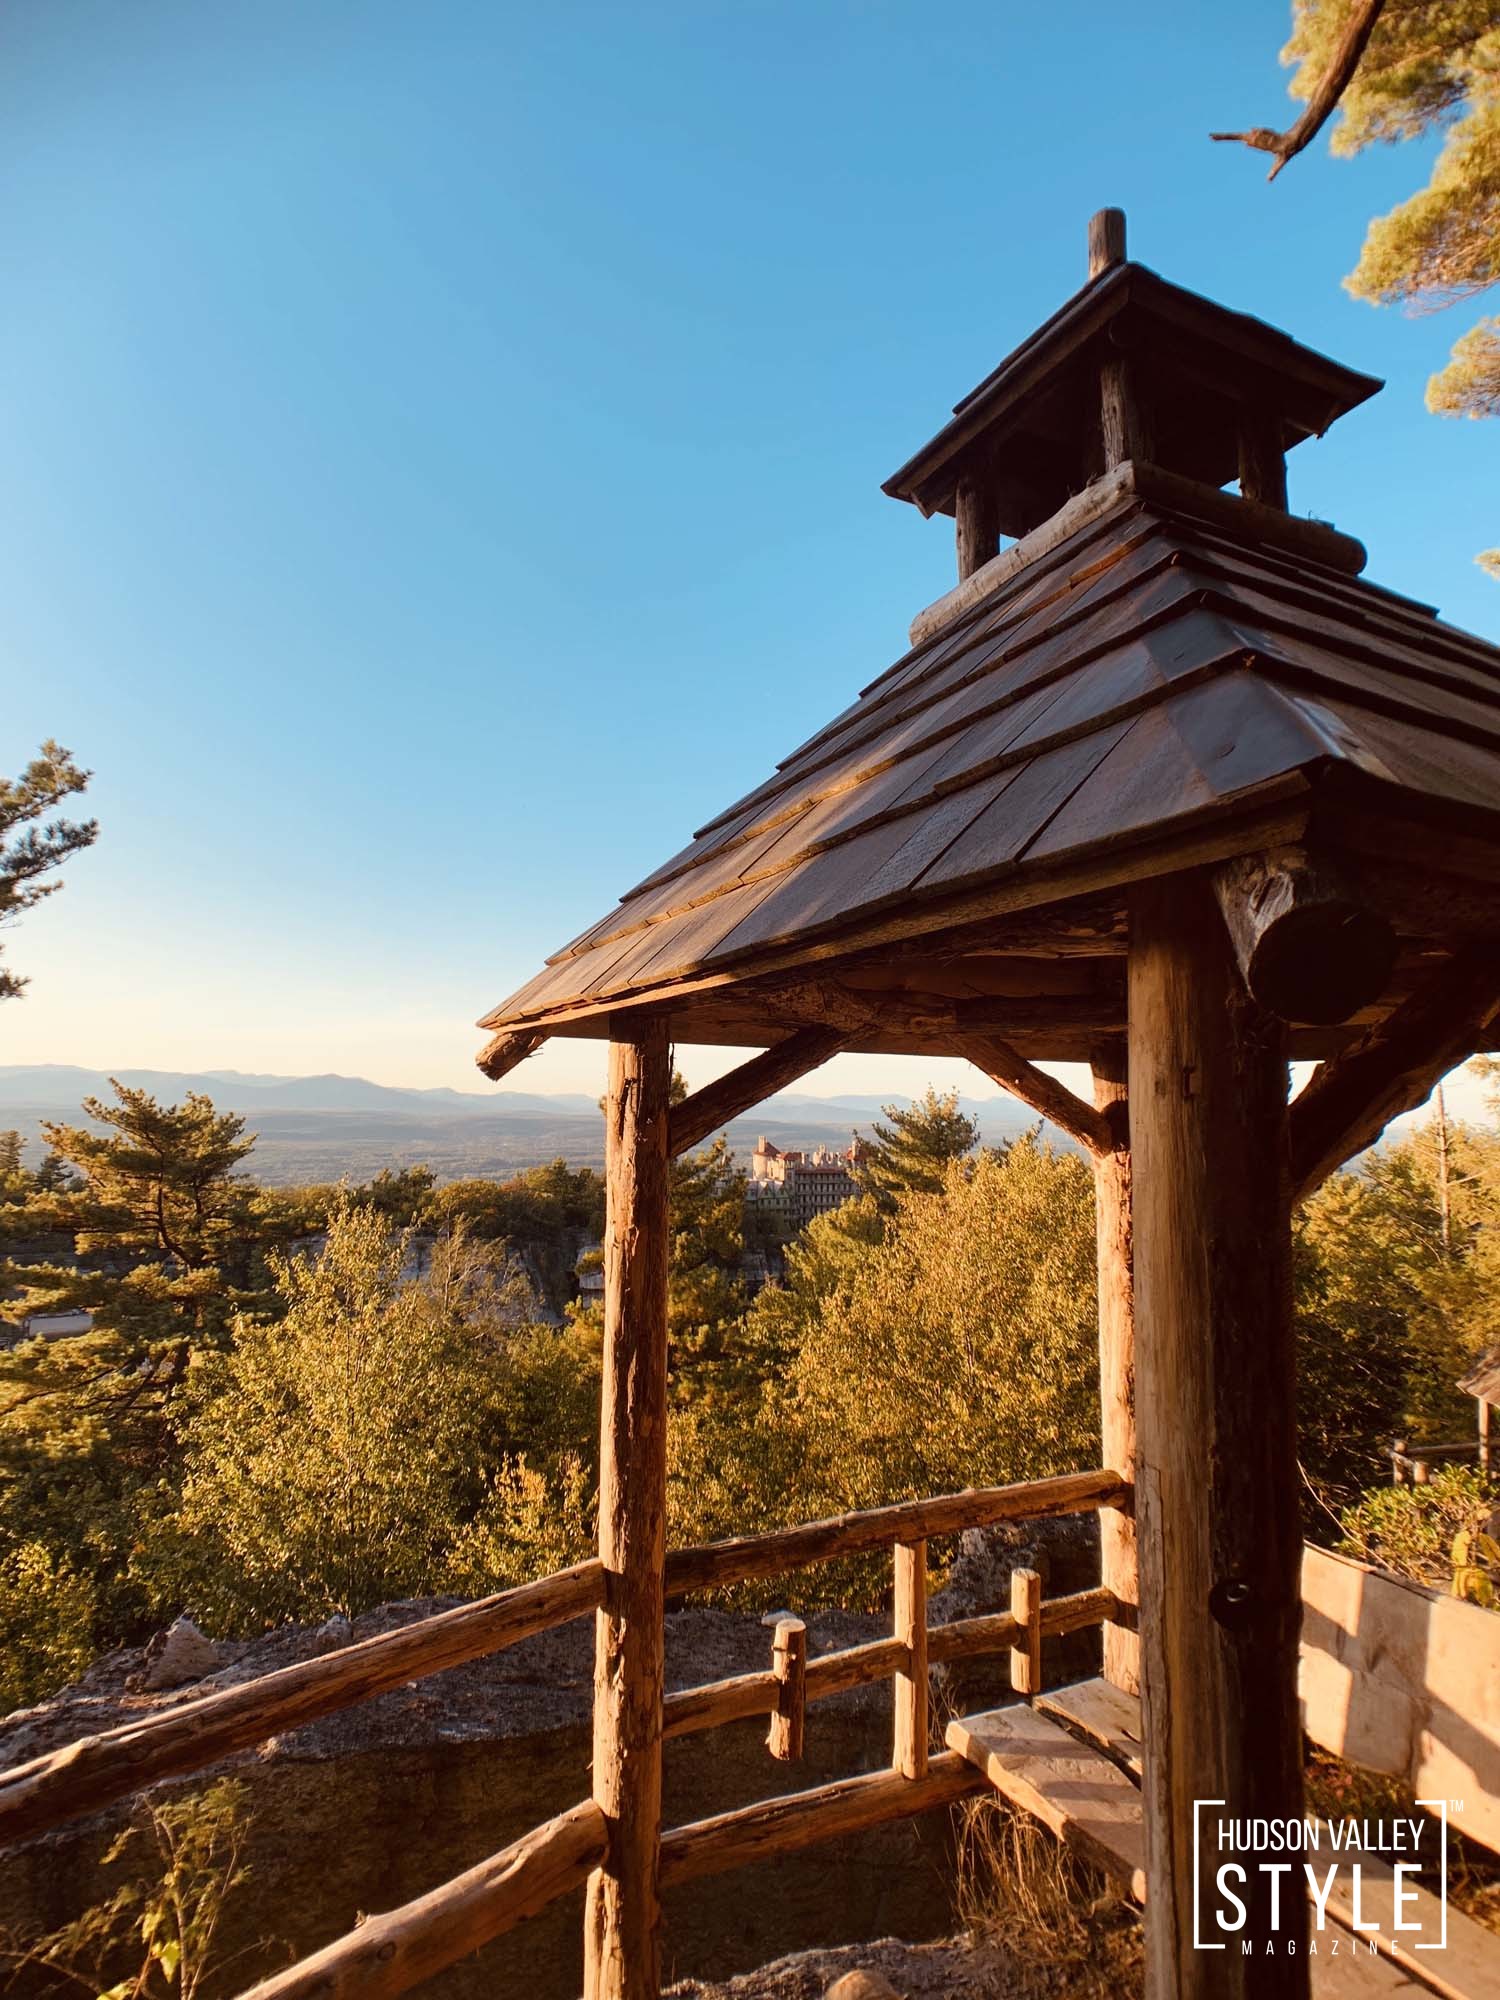 Exploring Mohonk Mountain Lake and Labyrinth Trail - Photo Story by Maxwell Alexander